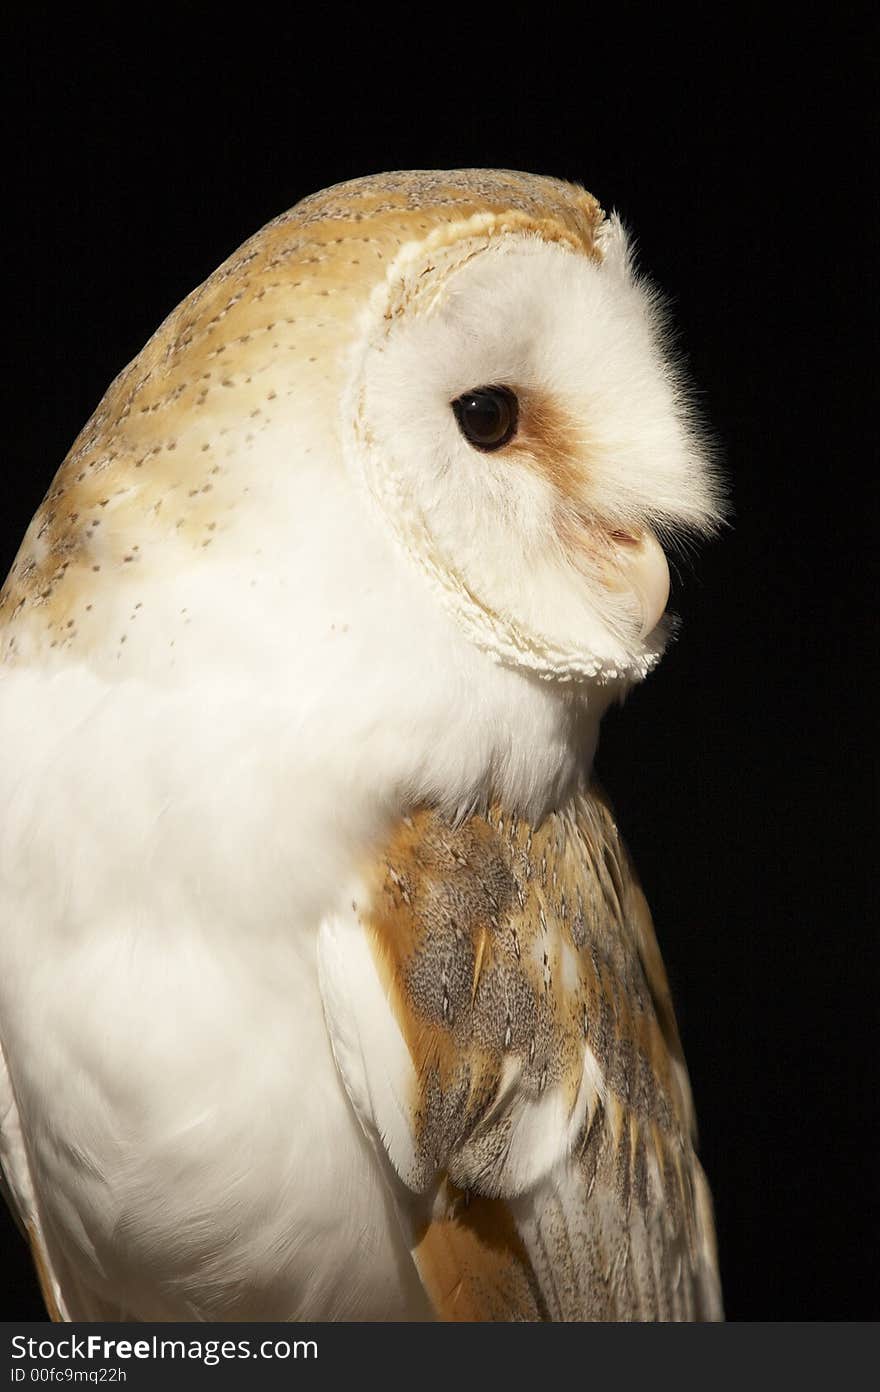 This beautiful Barn Owl was captured at a Raptor centre in Hampshire, UK.